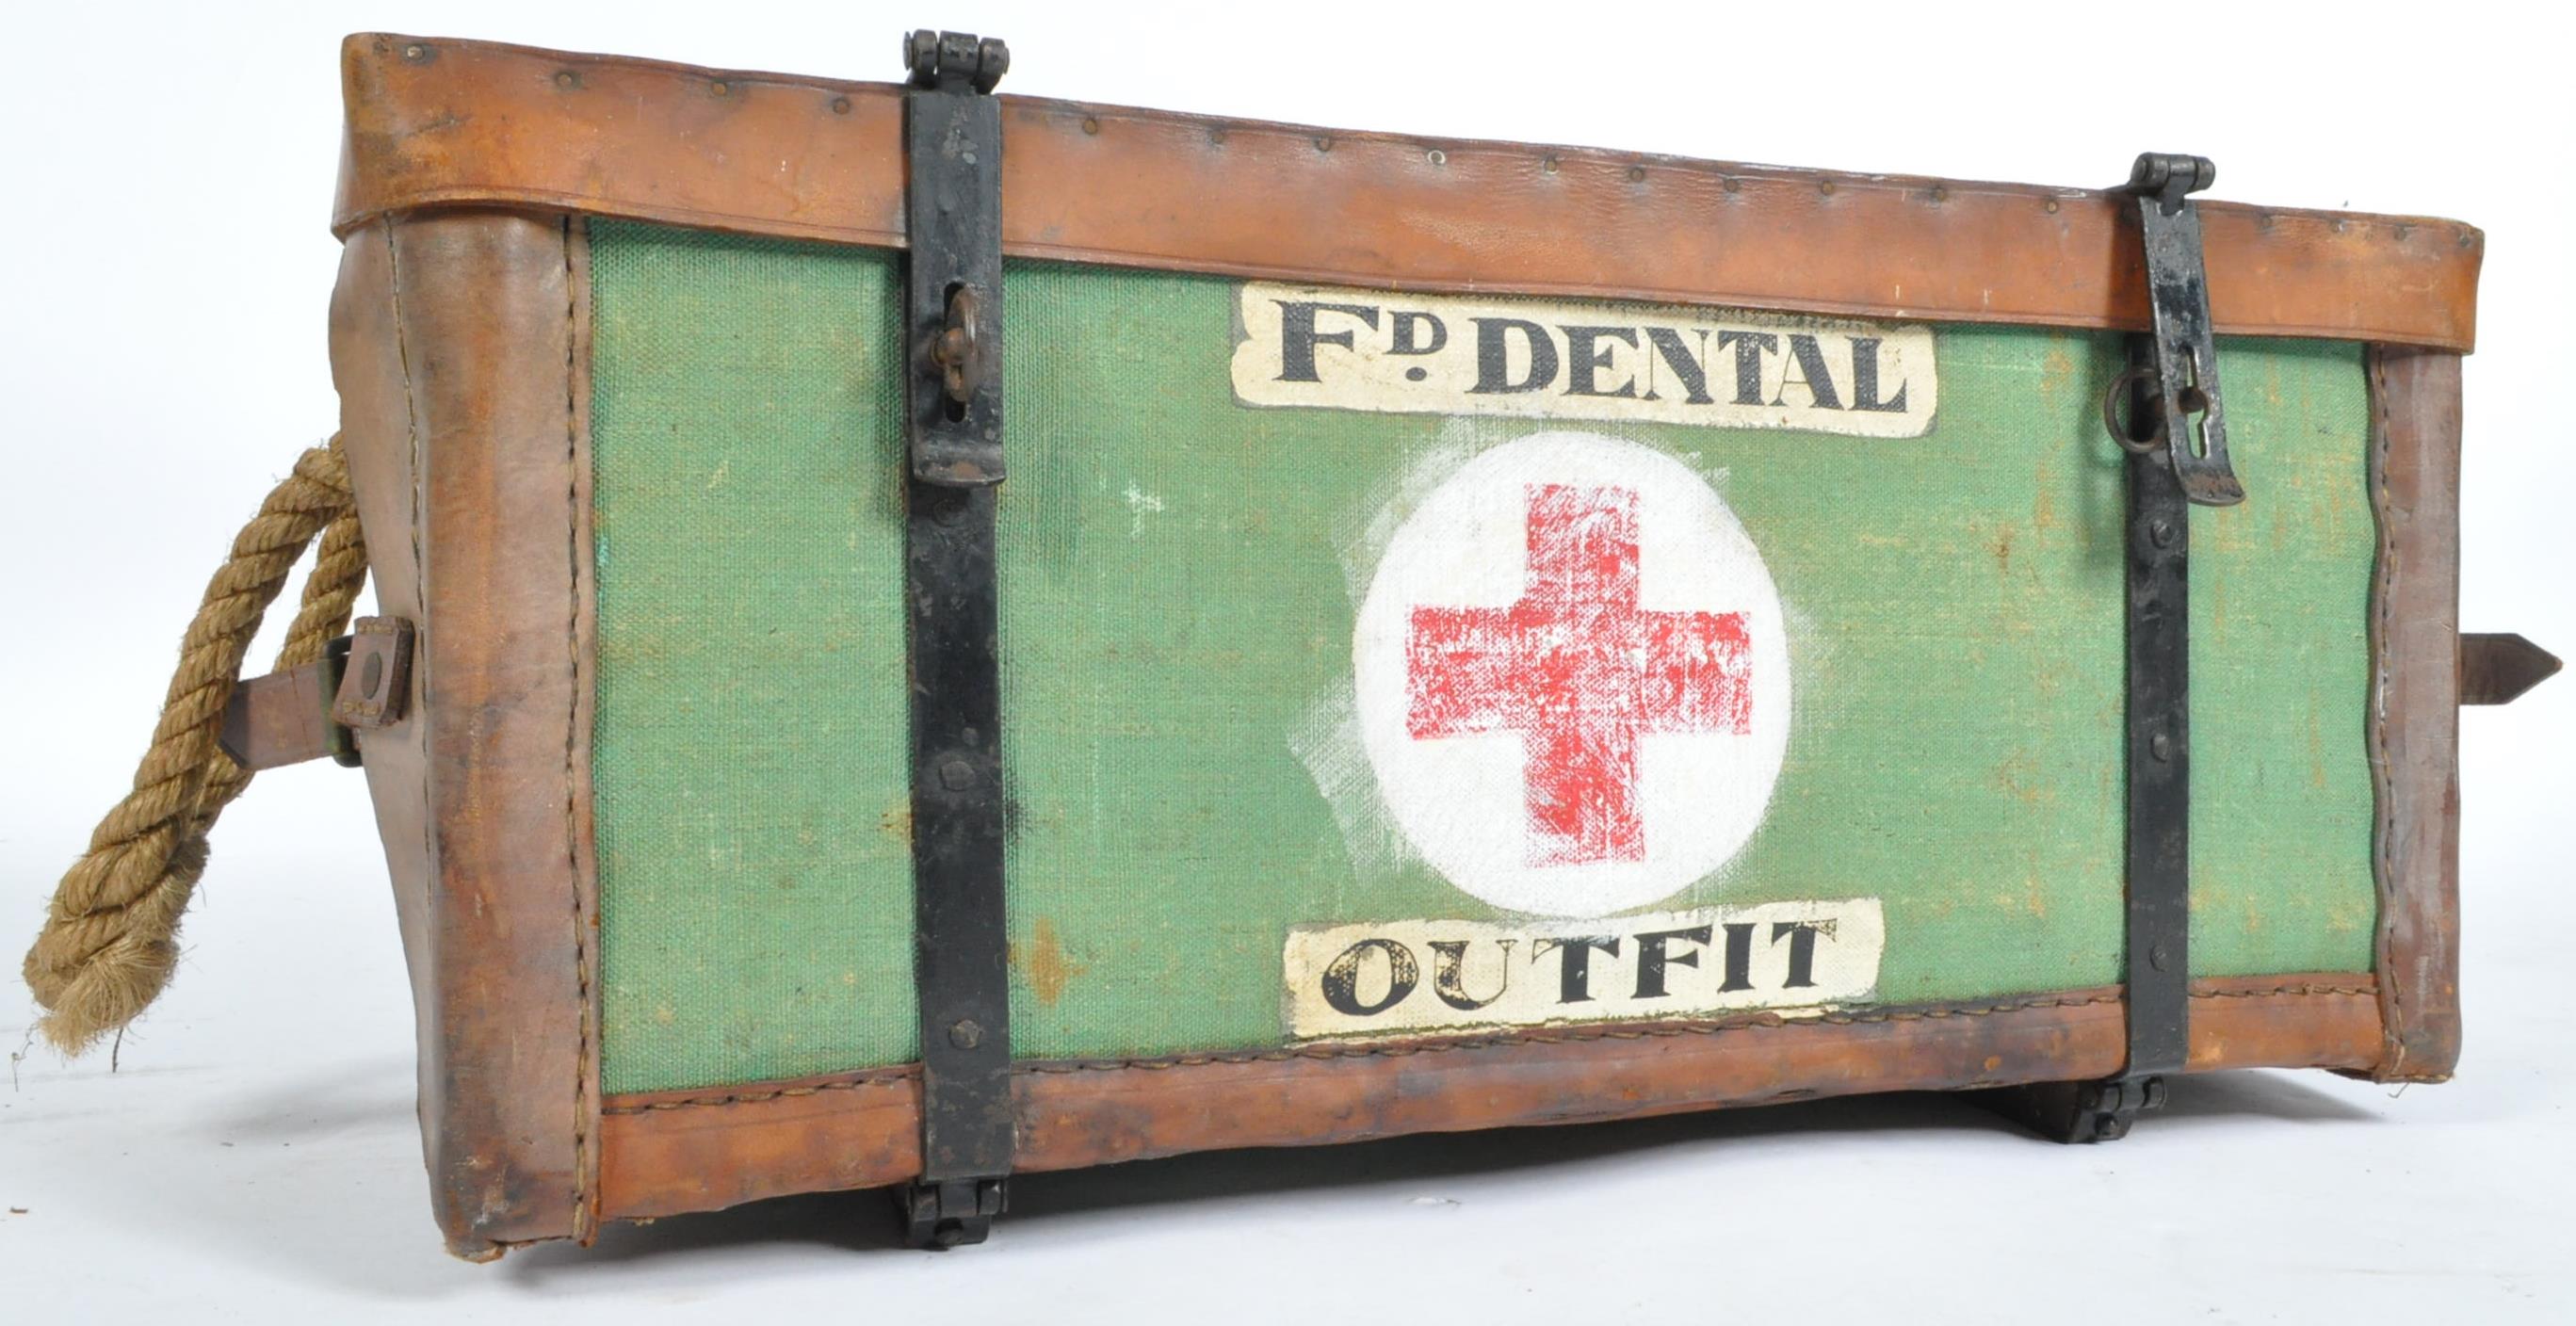 WWII SECOND WORLD WAR FIRST AID ' DENTAL OUTFIT ' AIR DROP BOX